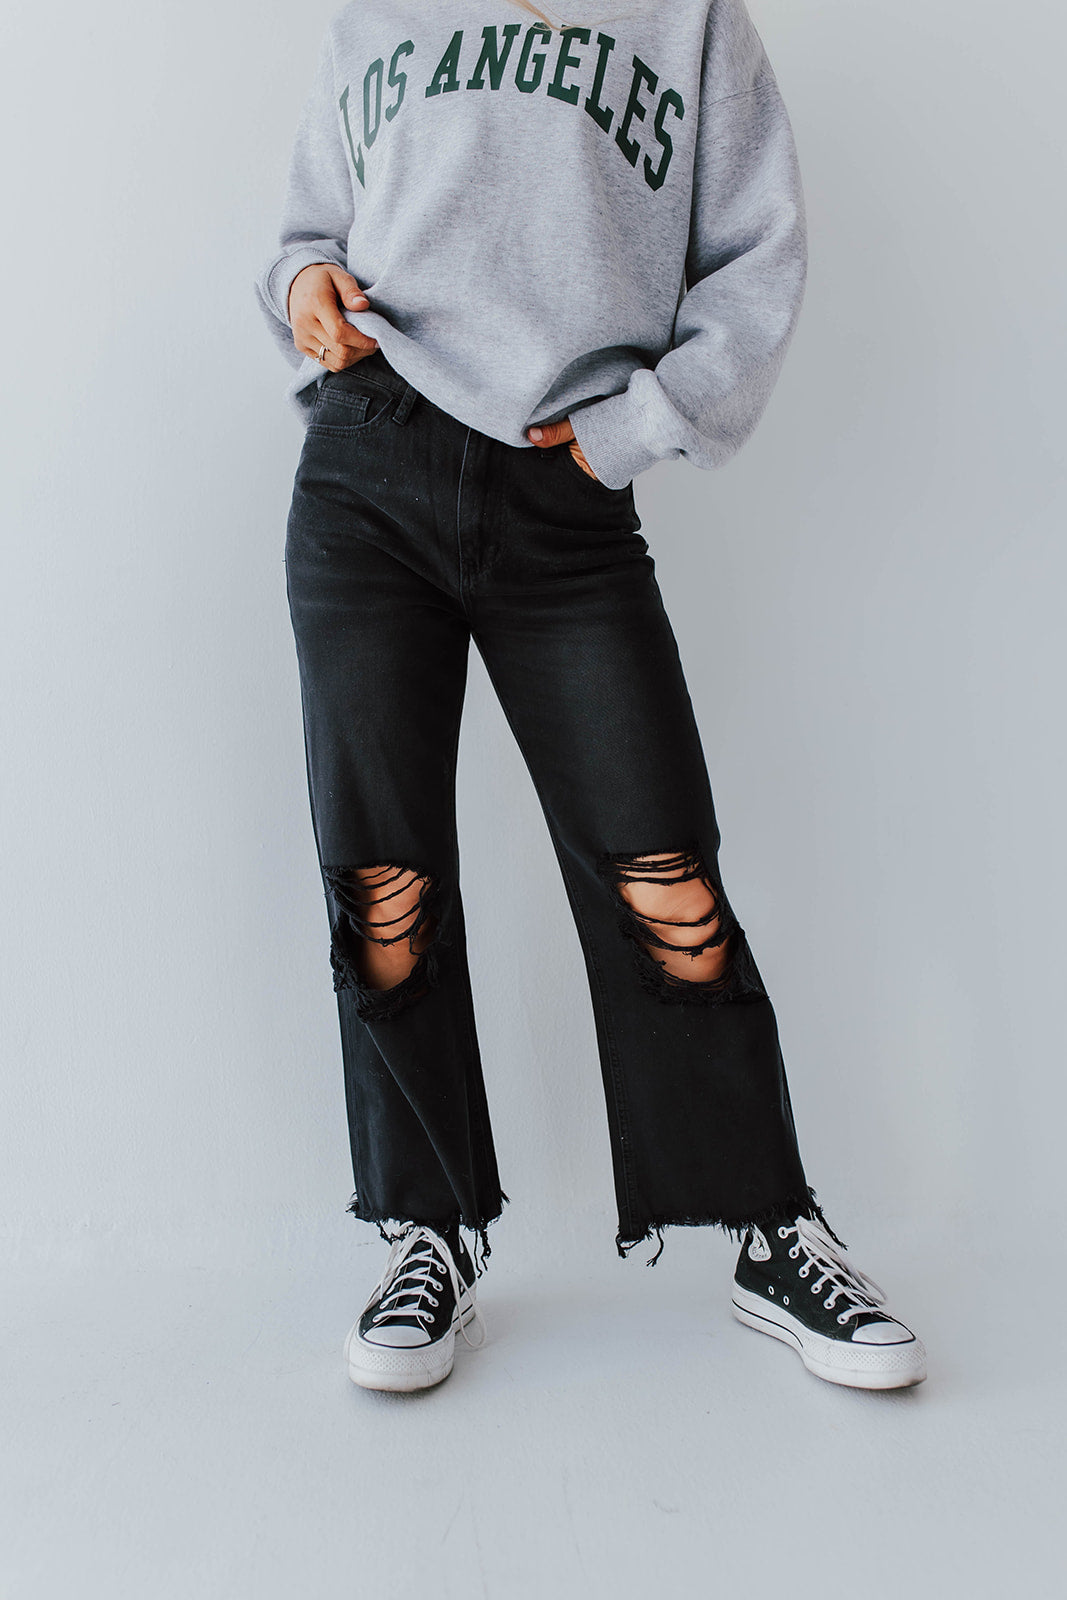 THE 90'S FLARE JEANS IN BLACK BY VERVET